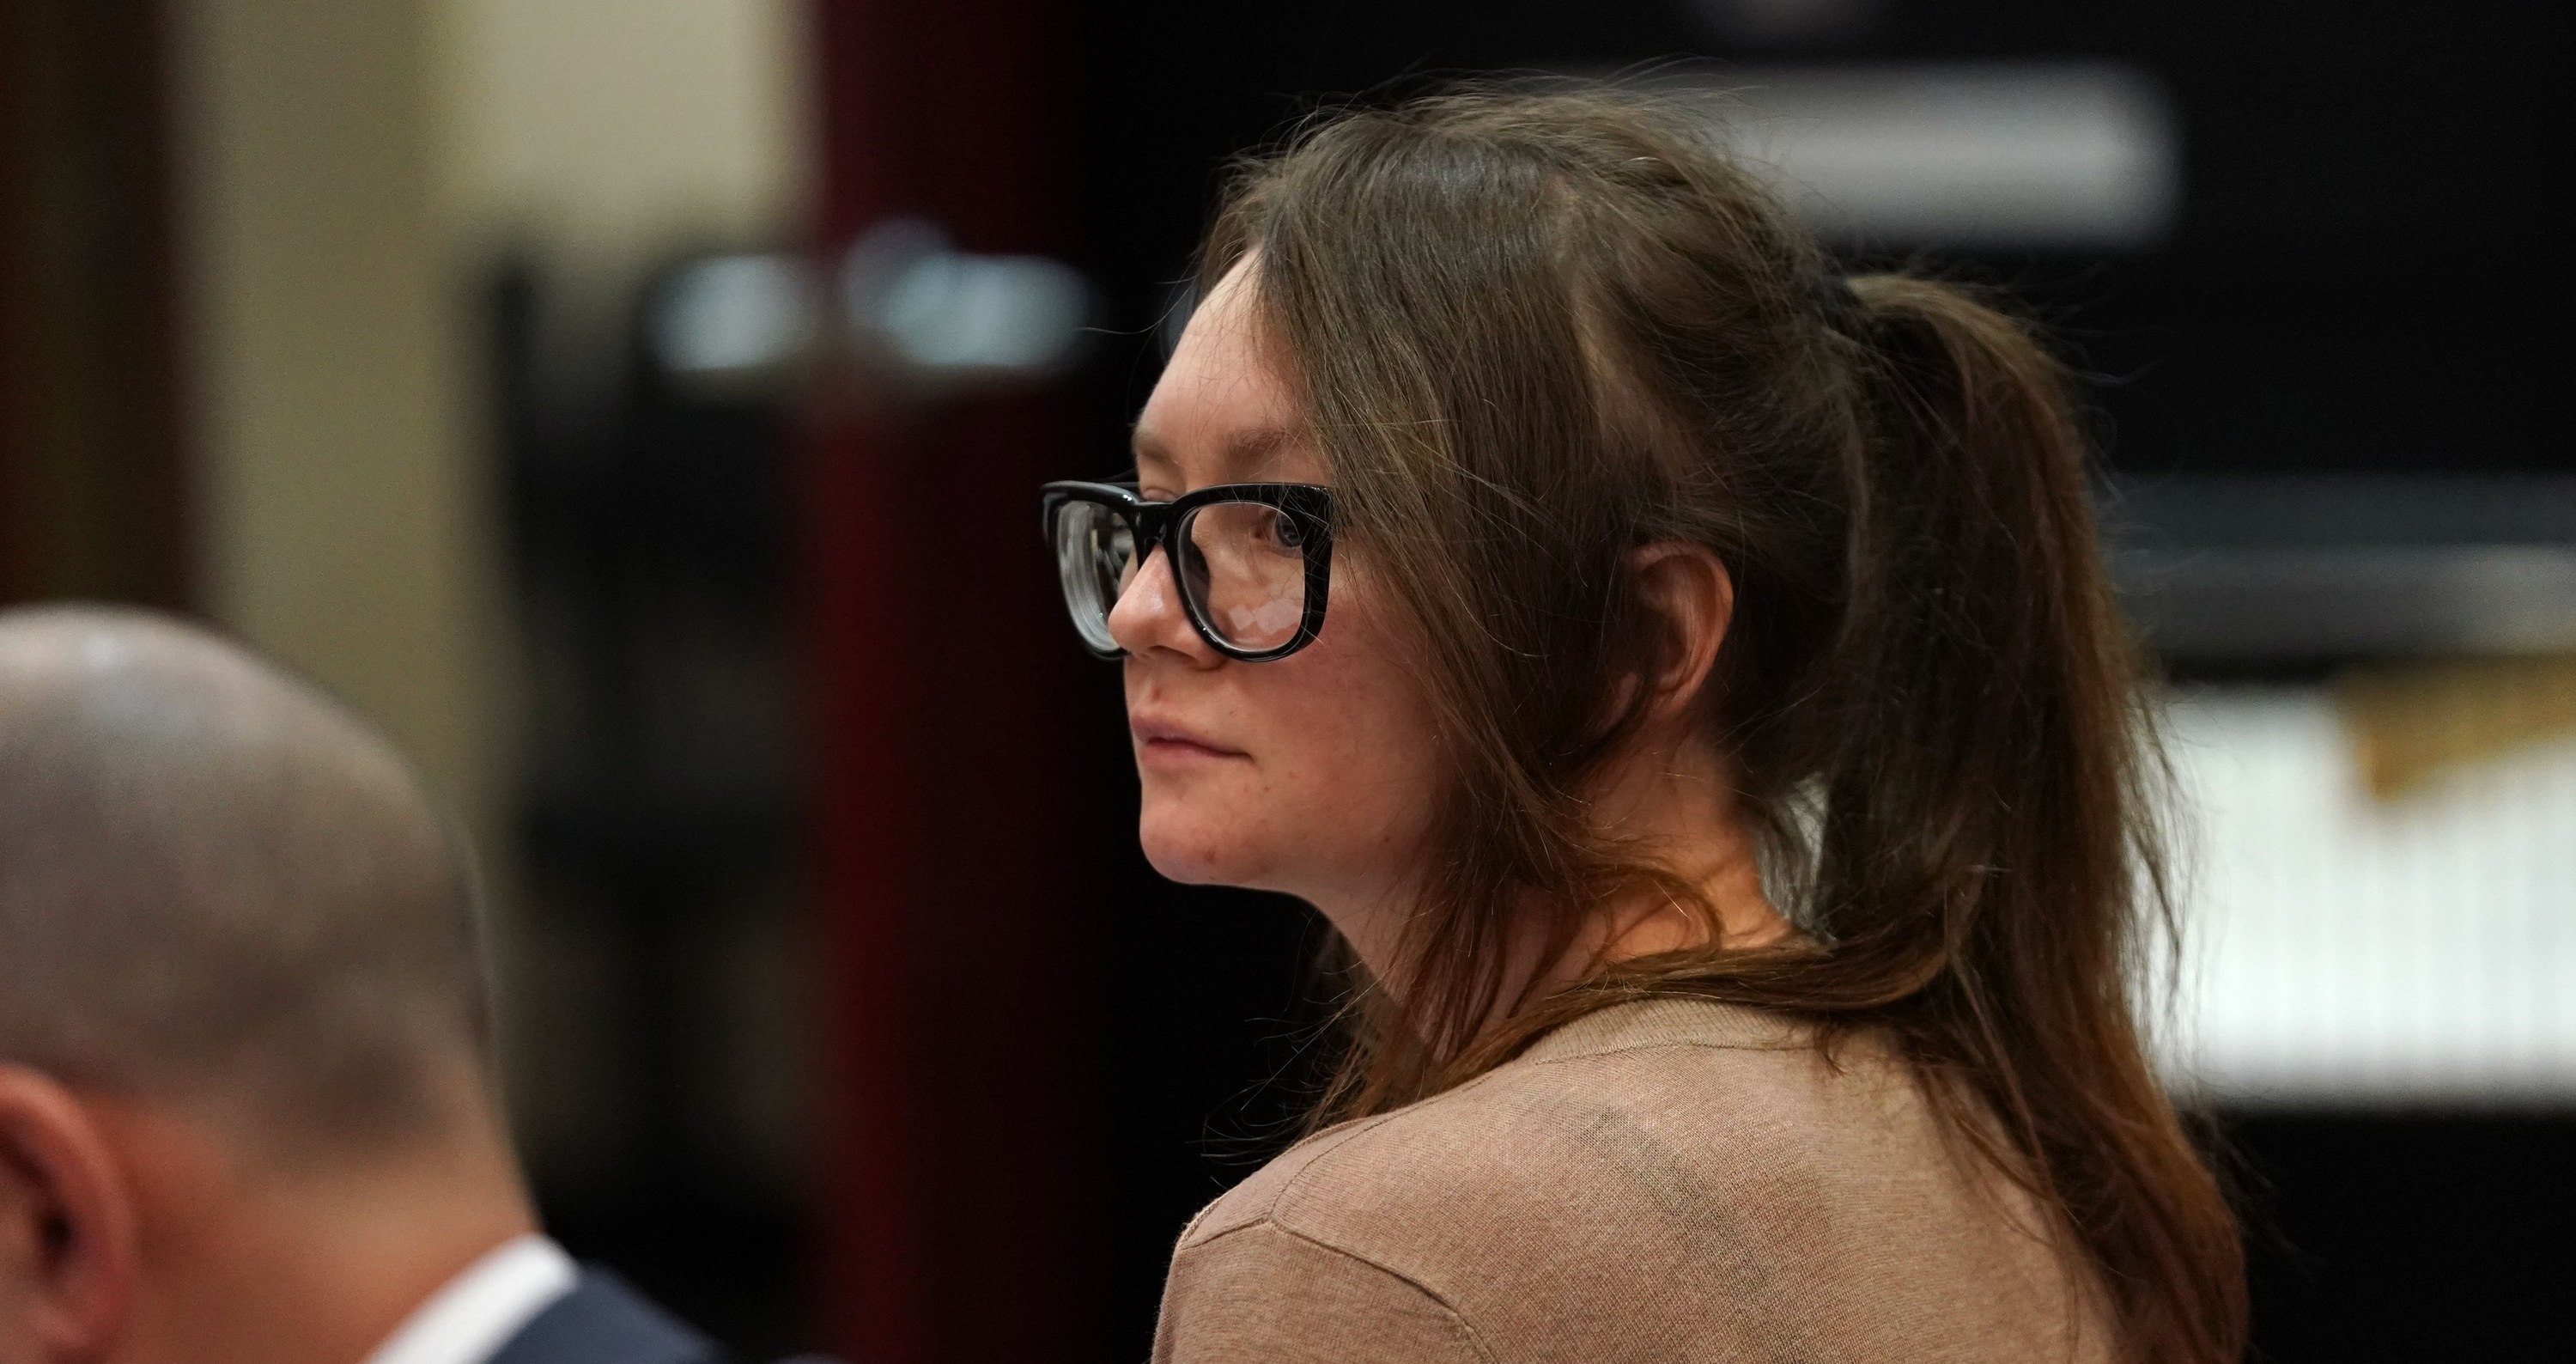 Anna sitting in the courtroom and wearing eyeglasses